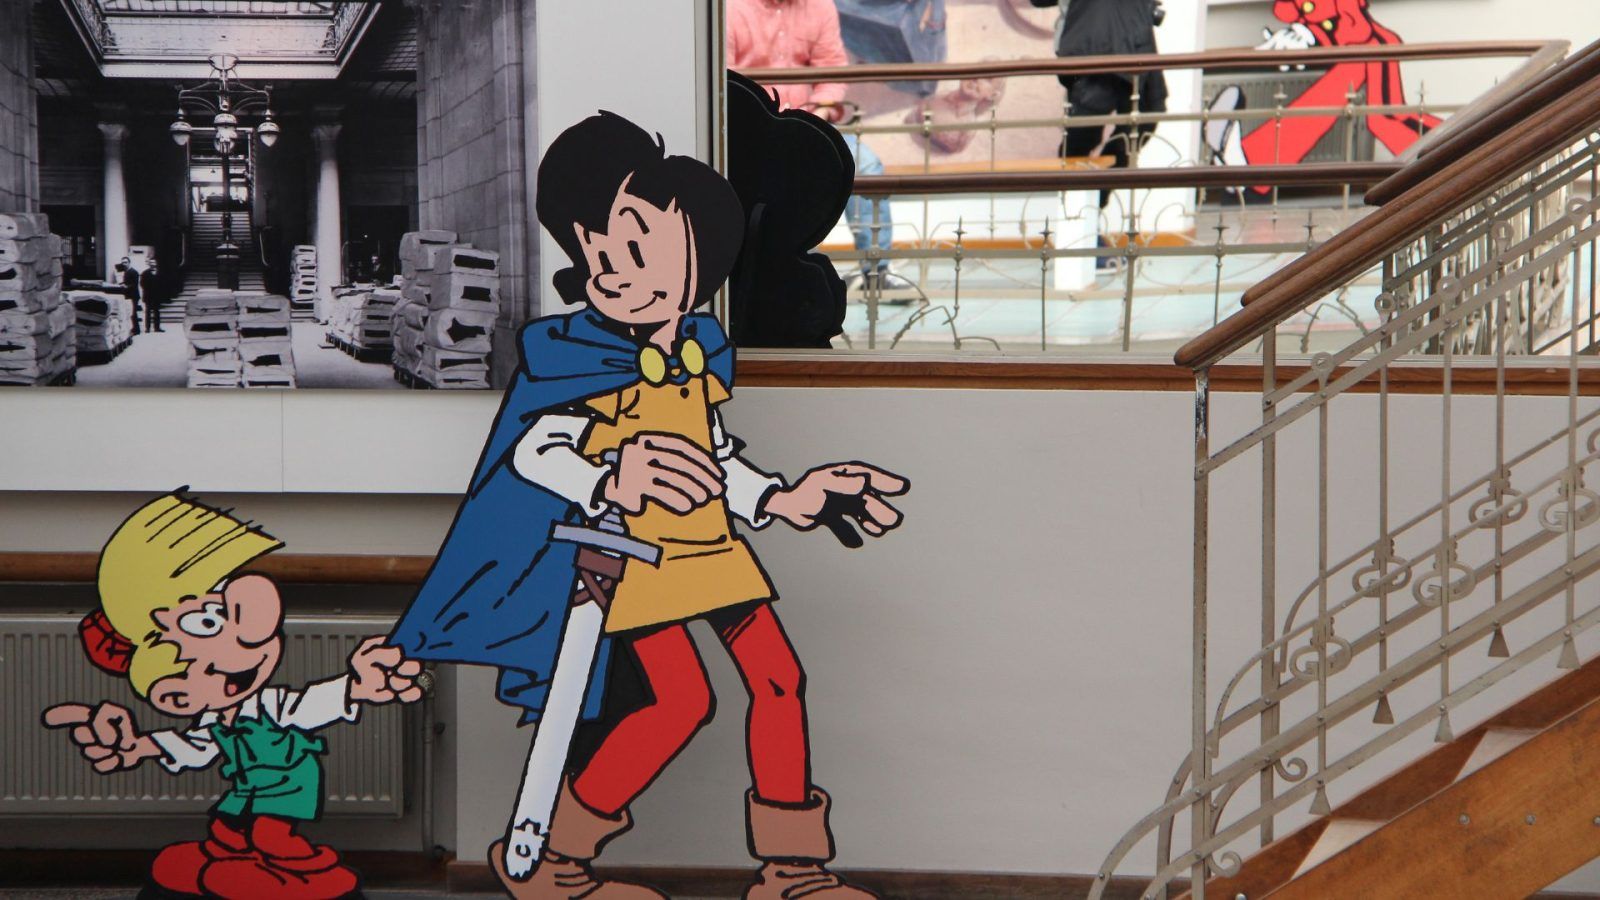 Did You Know Brussels Is Home To A Museum Of Comics? (We’re Not Kidding!)